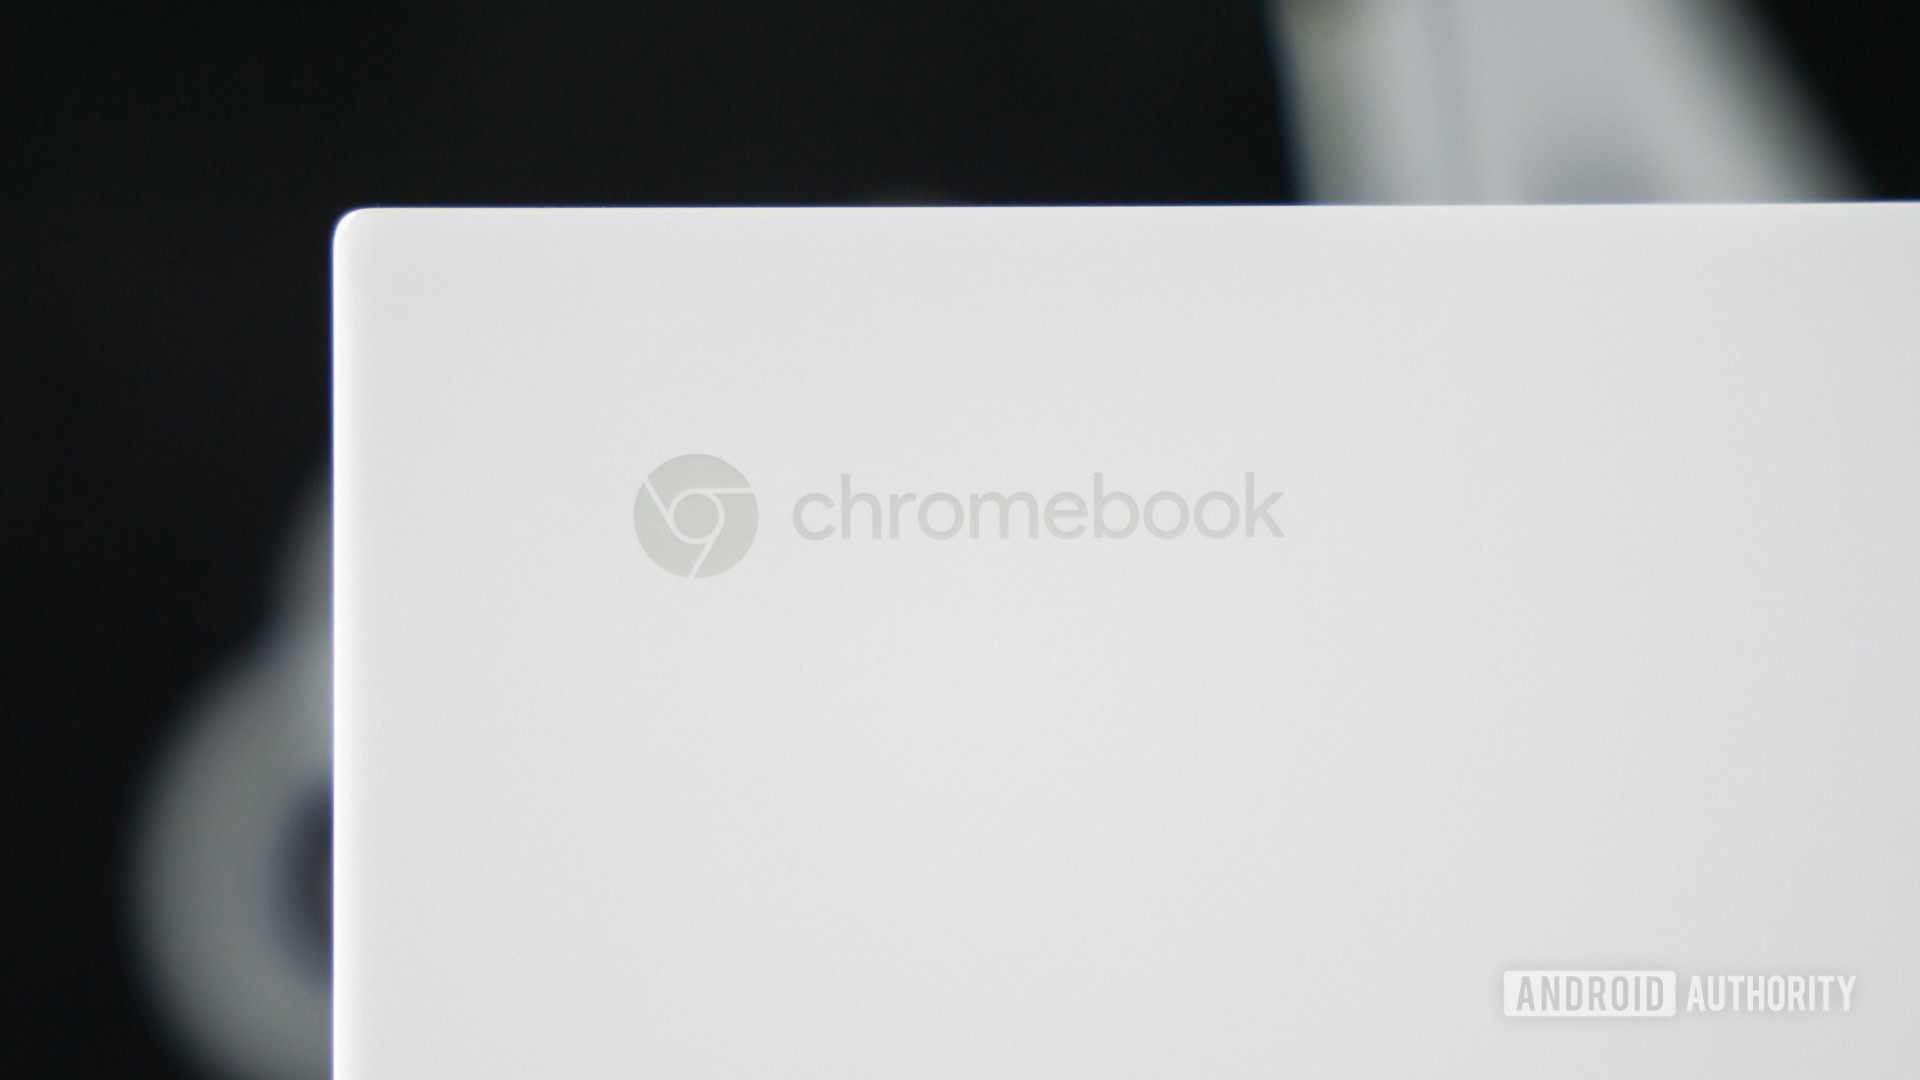 Chromebook owners can try out GeForce Now for free – but there's a catch